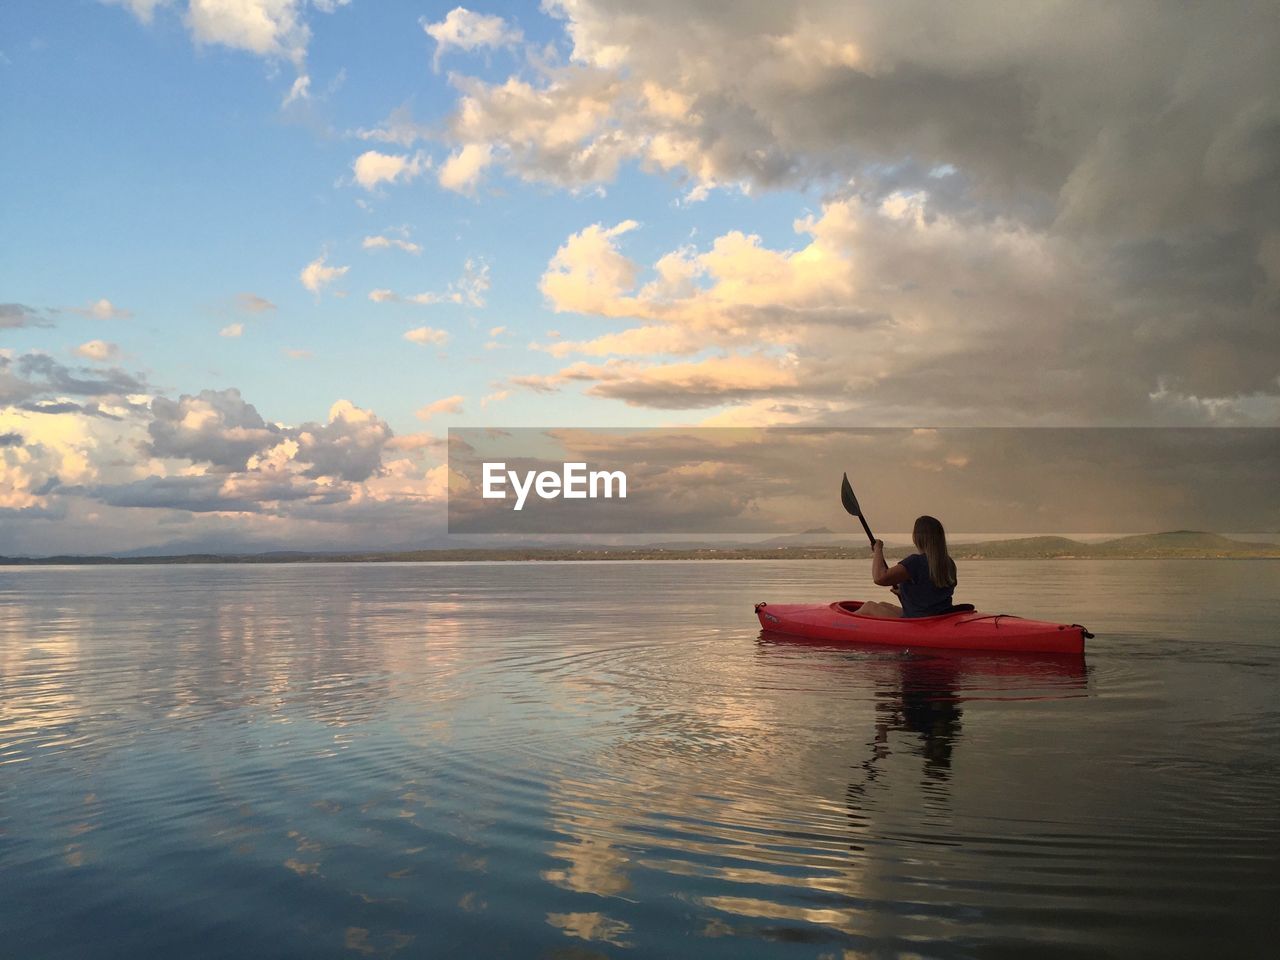 Mature woman canoeing on sea against cloudy sky during sunset